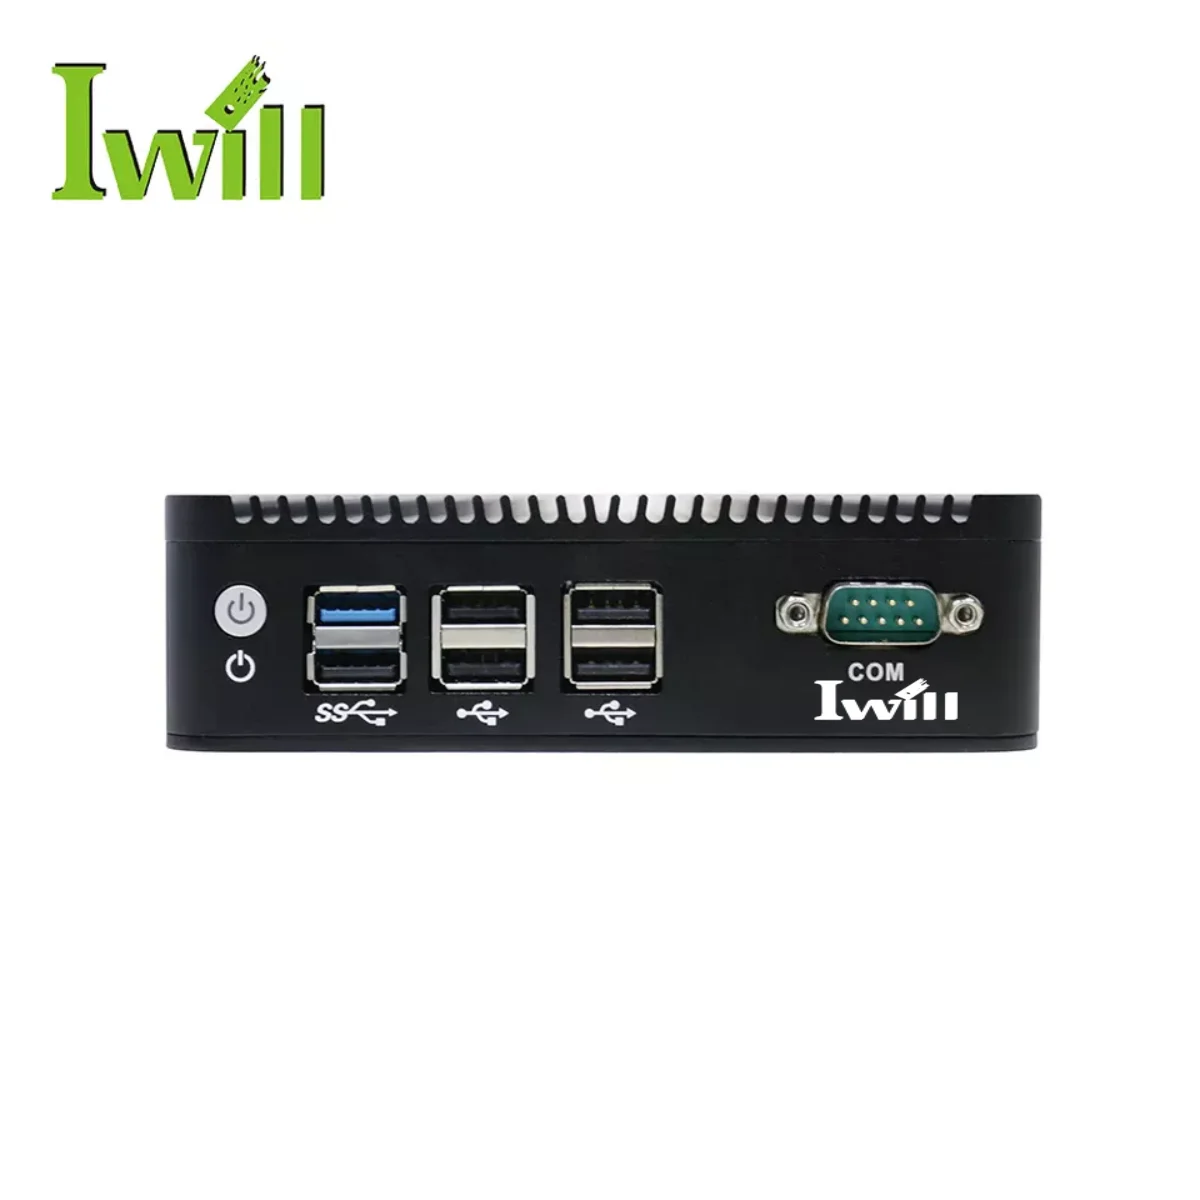 

IWILL nano duanl lan mini pc N3160 quad core Fanless micro computer with 2HD Support Linux Os